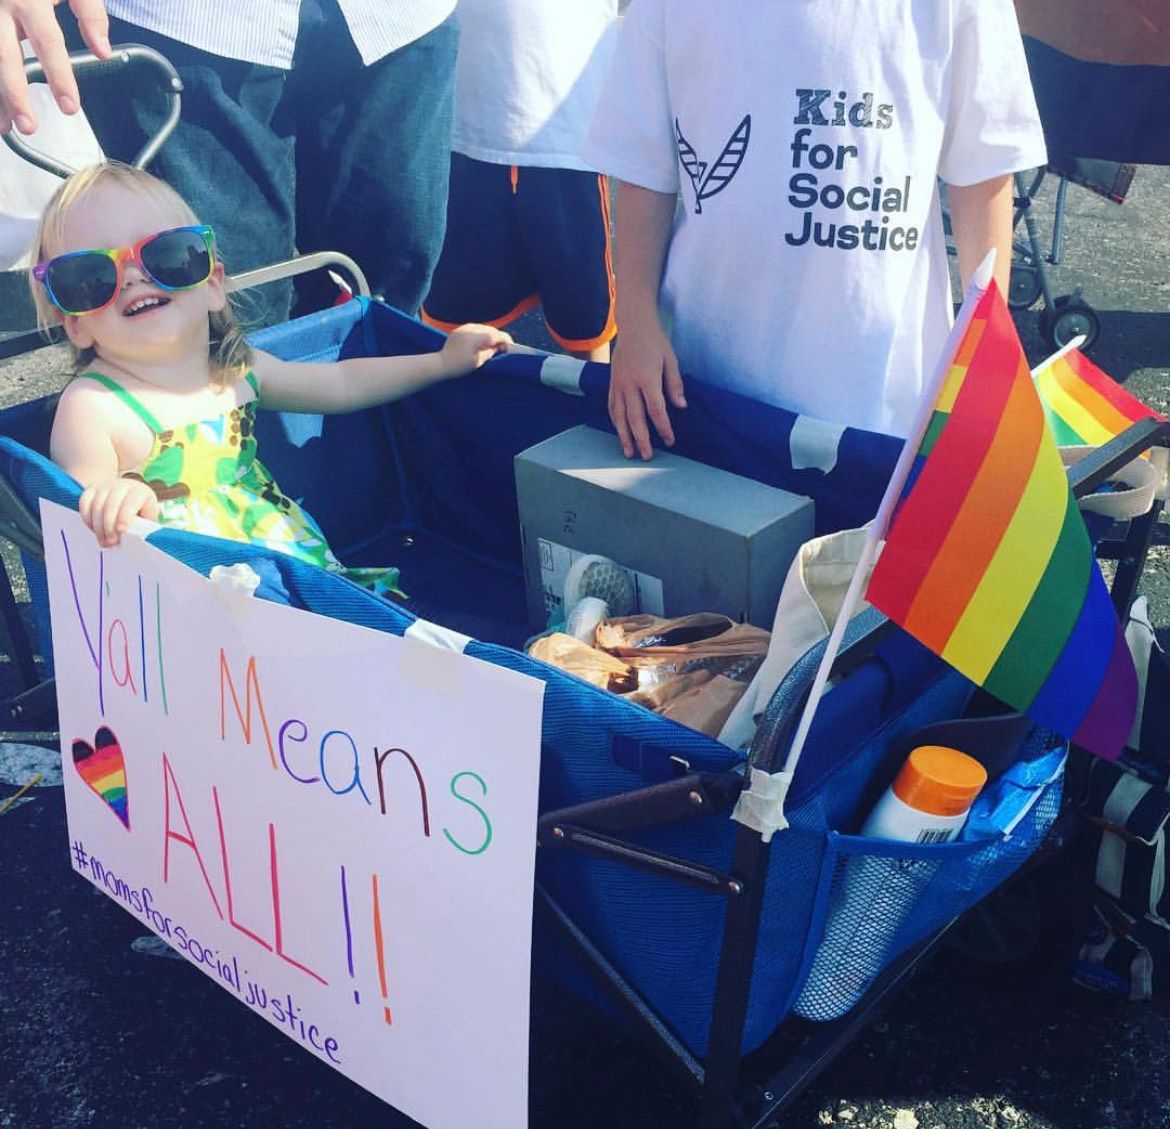 Kids for Social Justice with Pride flag and sign reading "Y'all means ALL!!"